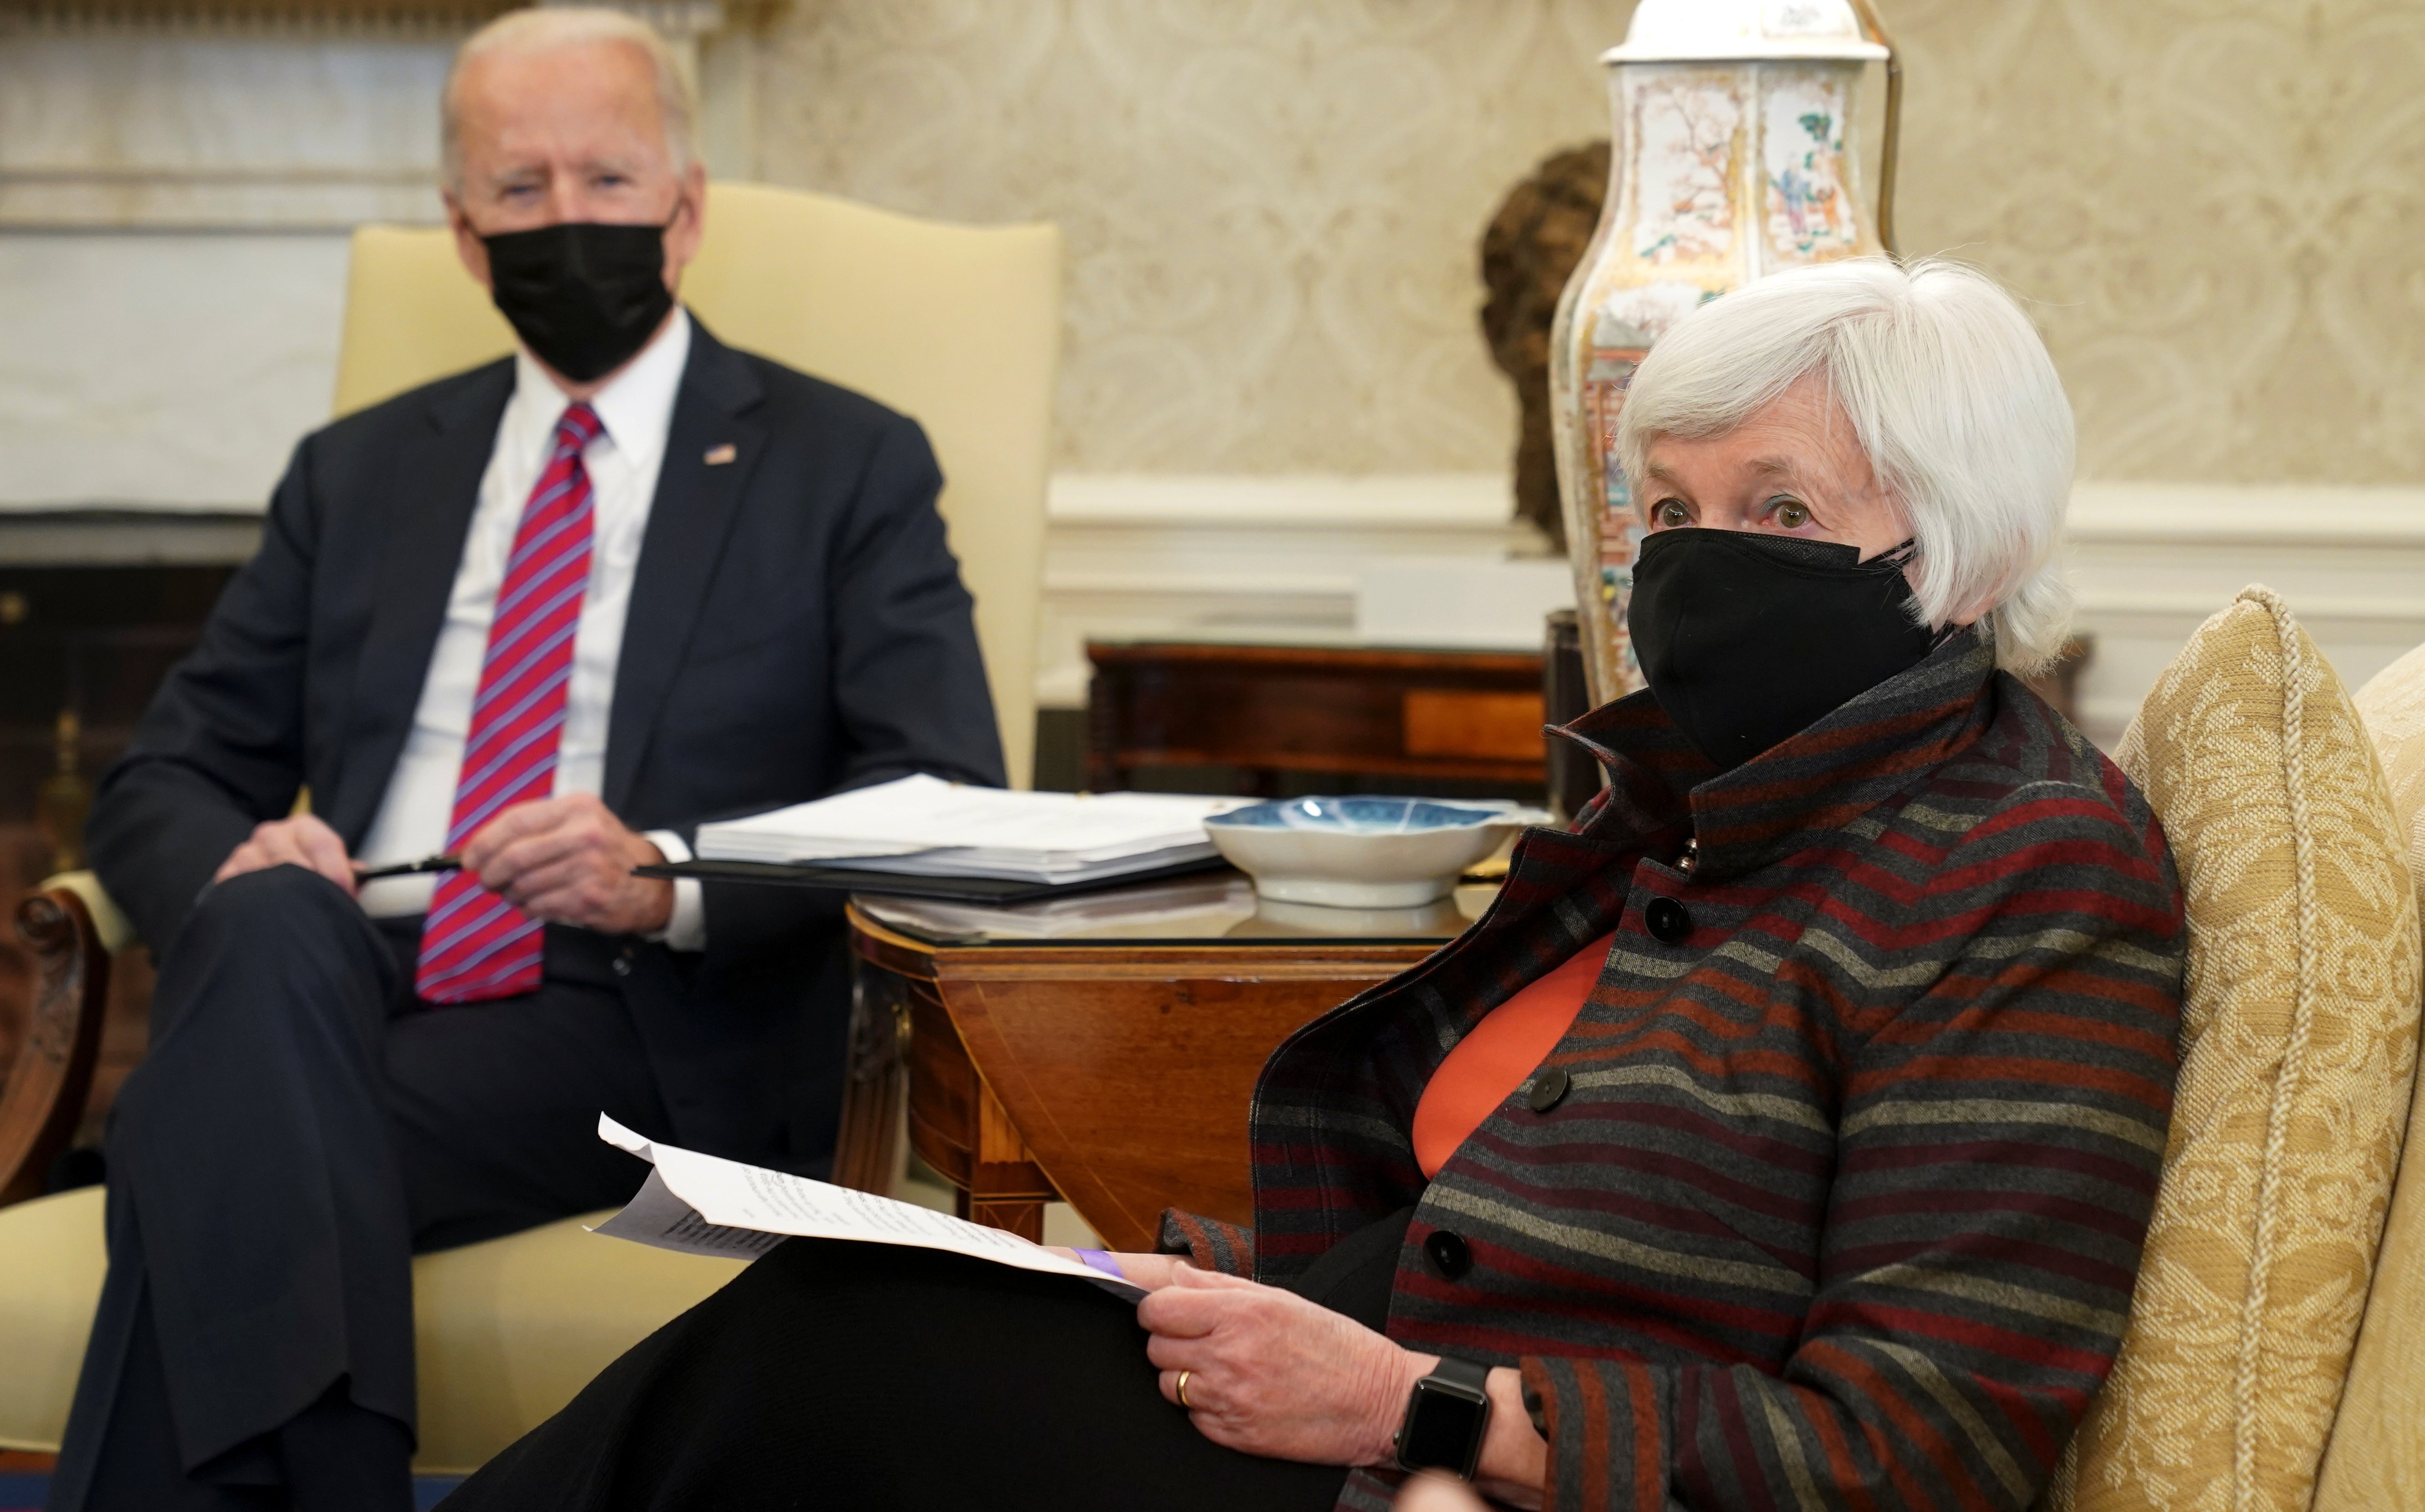 US President Joe Biden meets with Treasury Secretary Janet Yellen in the Oval Office at the White House in Washington on January 29. Photo: Reuters